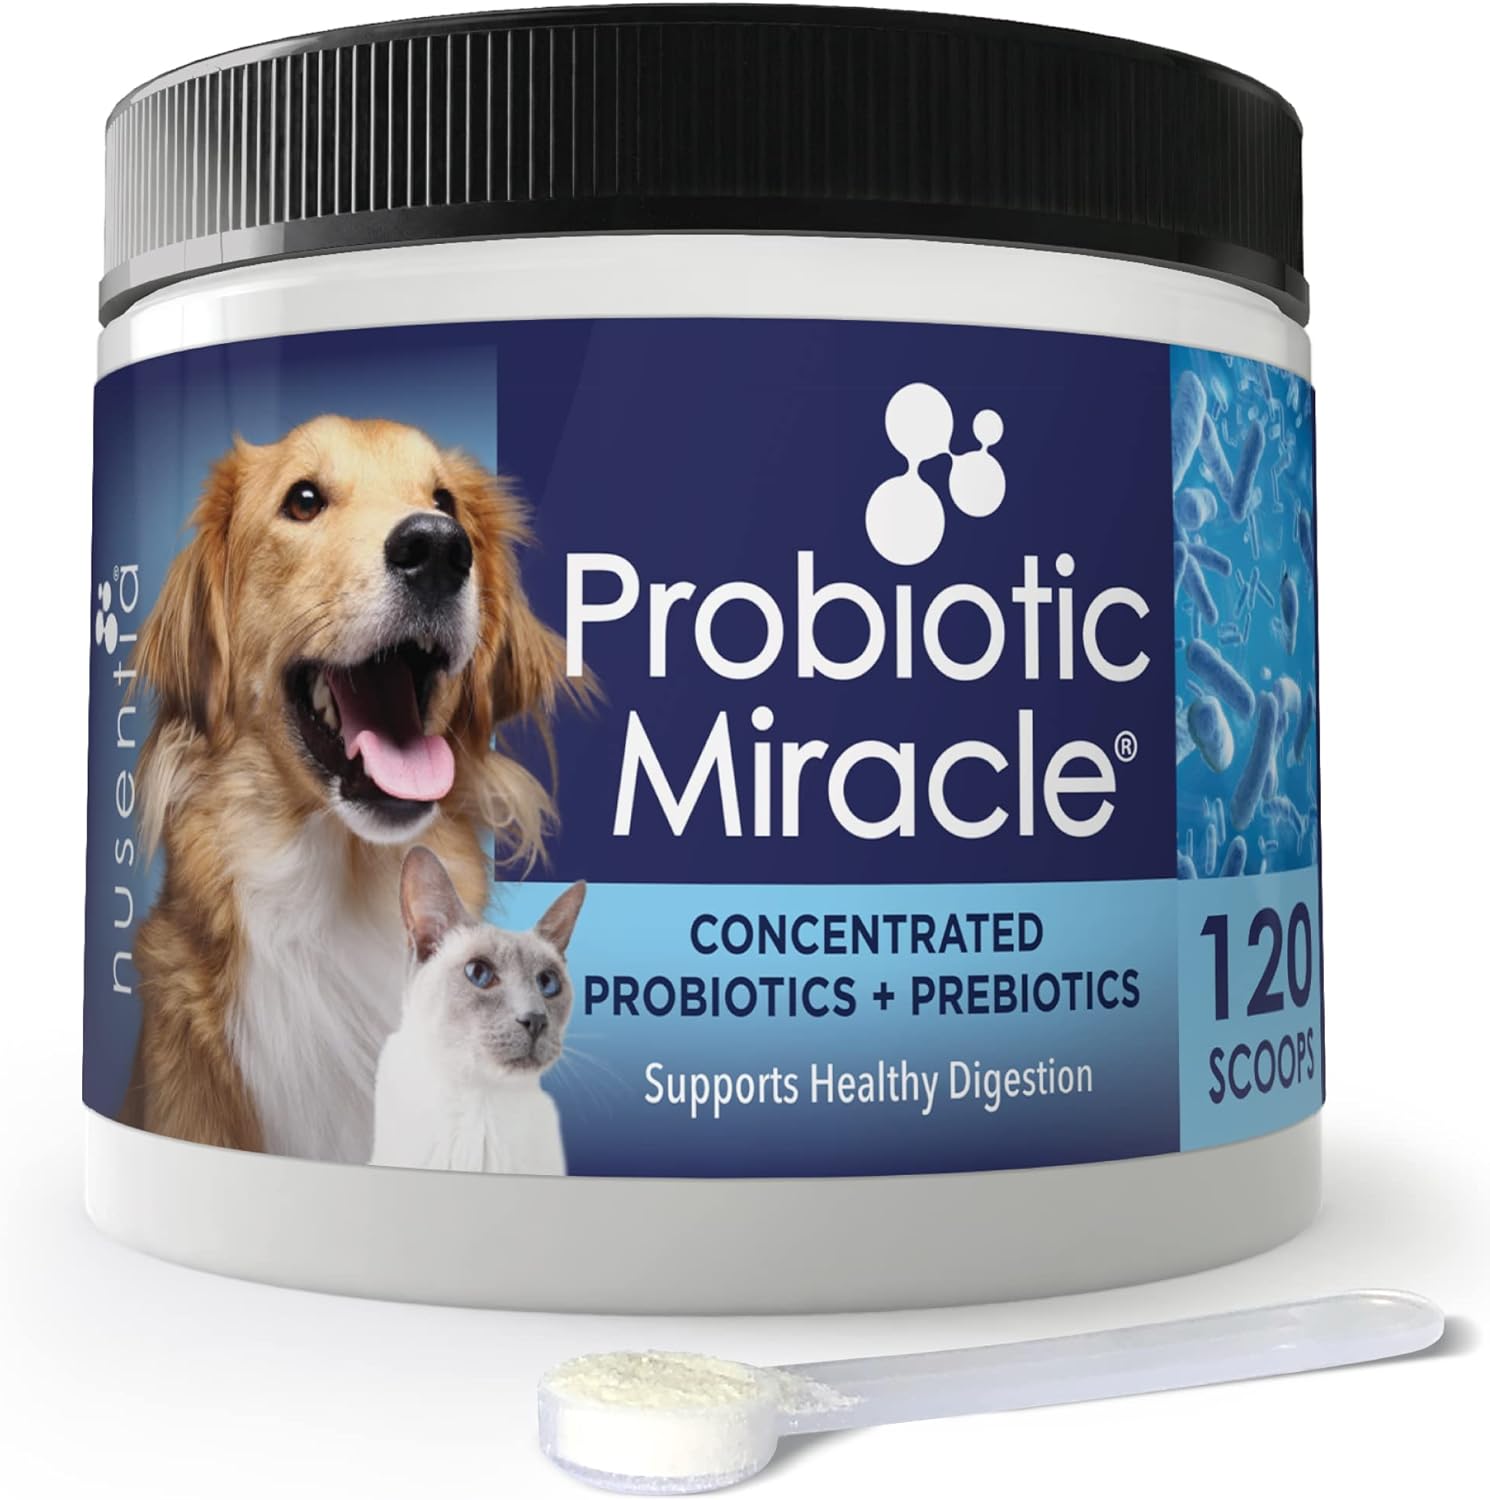 Probiotics for Cats & Dogs - (120 Scoops) Probiotic Miracle - Advanced Formula to Stop Diarrhea, Loose Stool, and Yeast